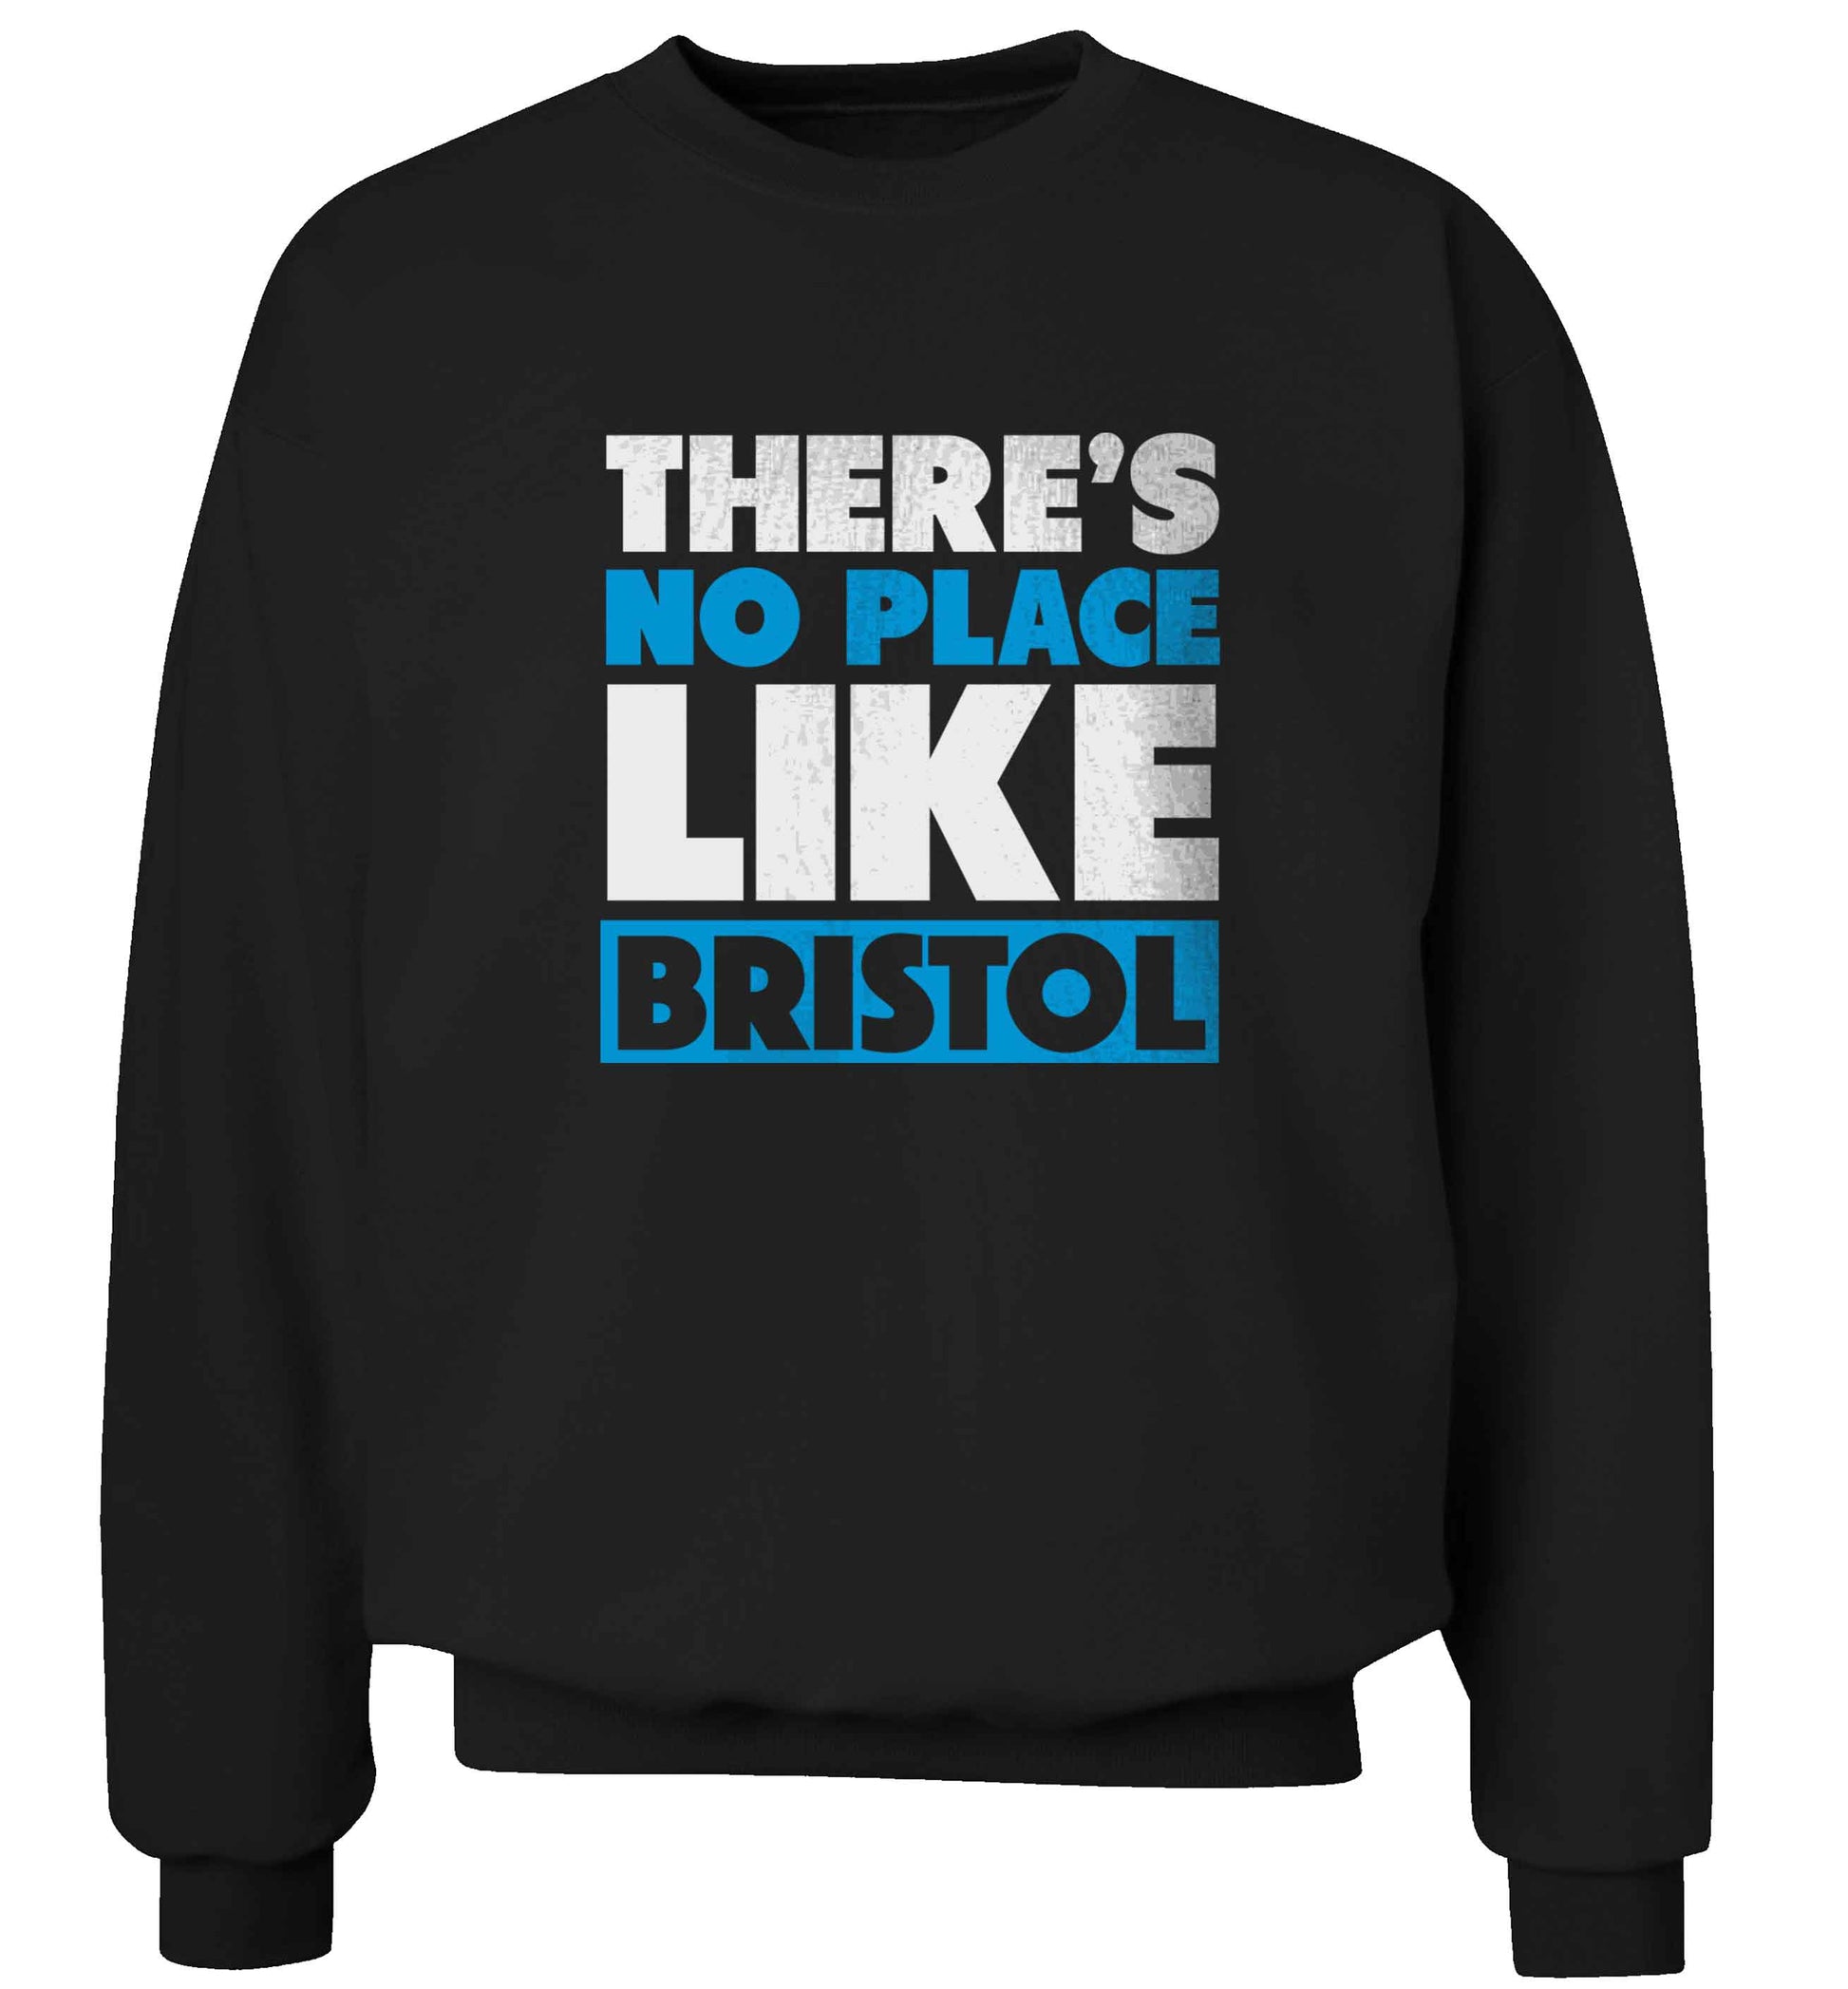 There's no place like Bristol adult's unisex black sweater 2XL